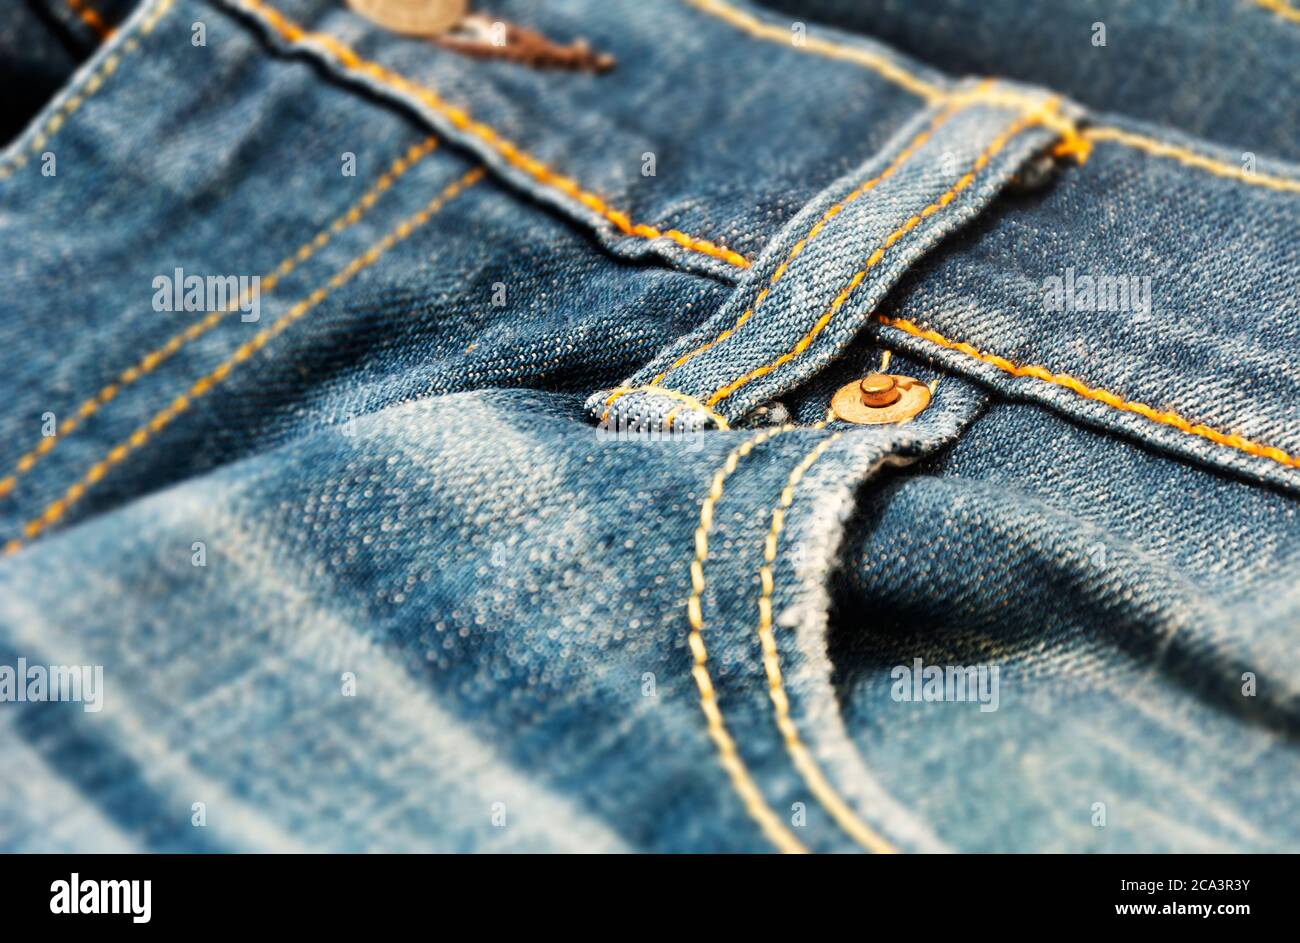 close-up view of the copper rivet on the pocket of a pair of denim trousers. Casual and workwear. Denim fabric for jeans trousers Stock Photo